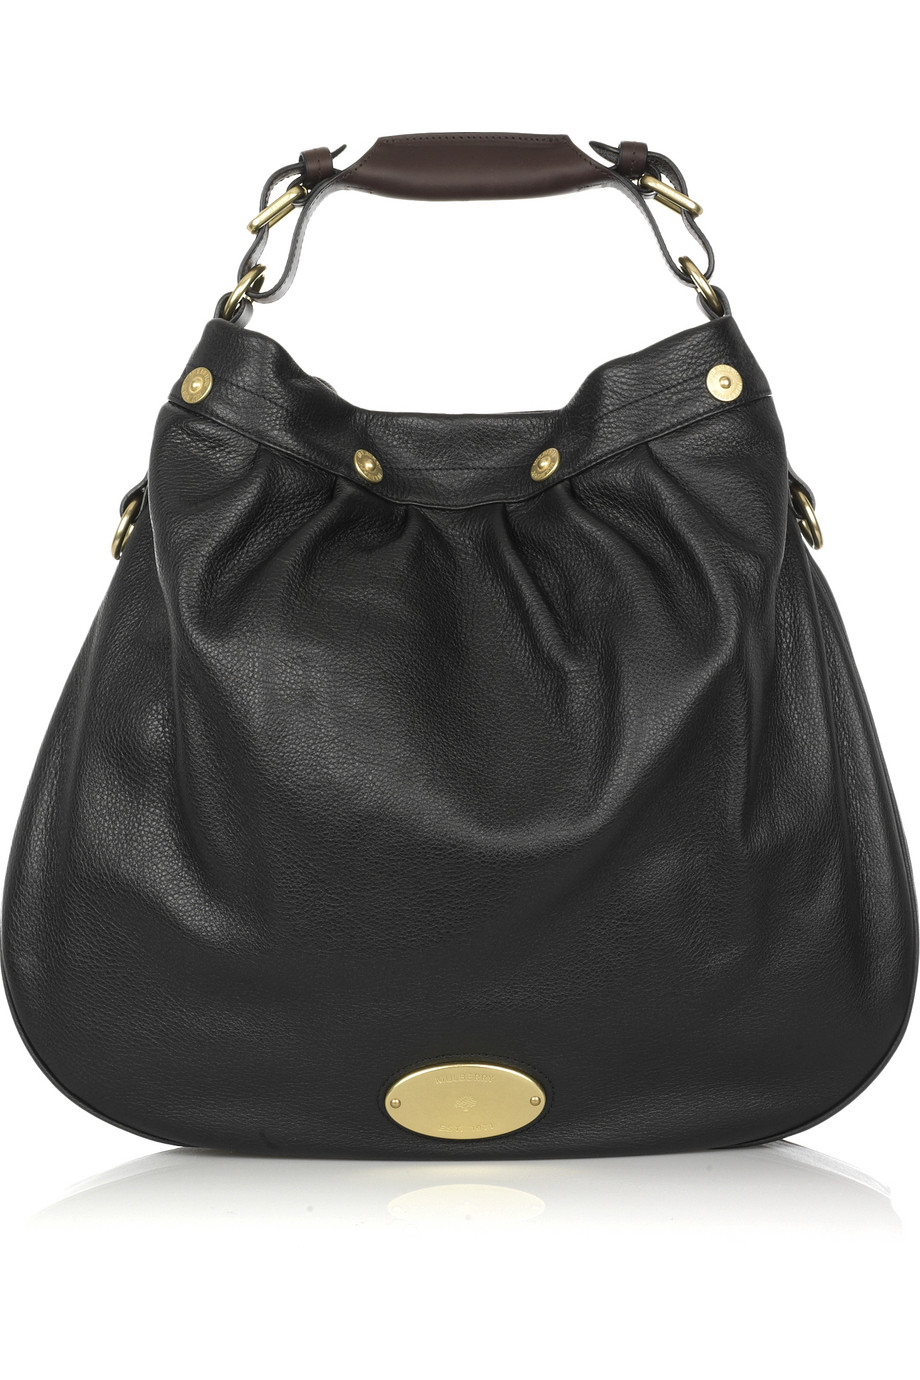 Mulberry Mitzy Leather Hobo in Black | Lyst